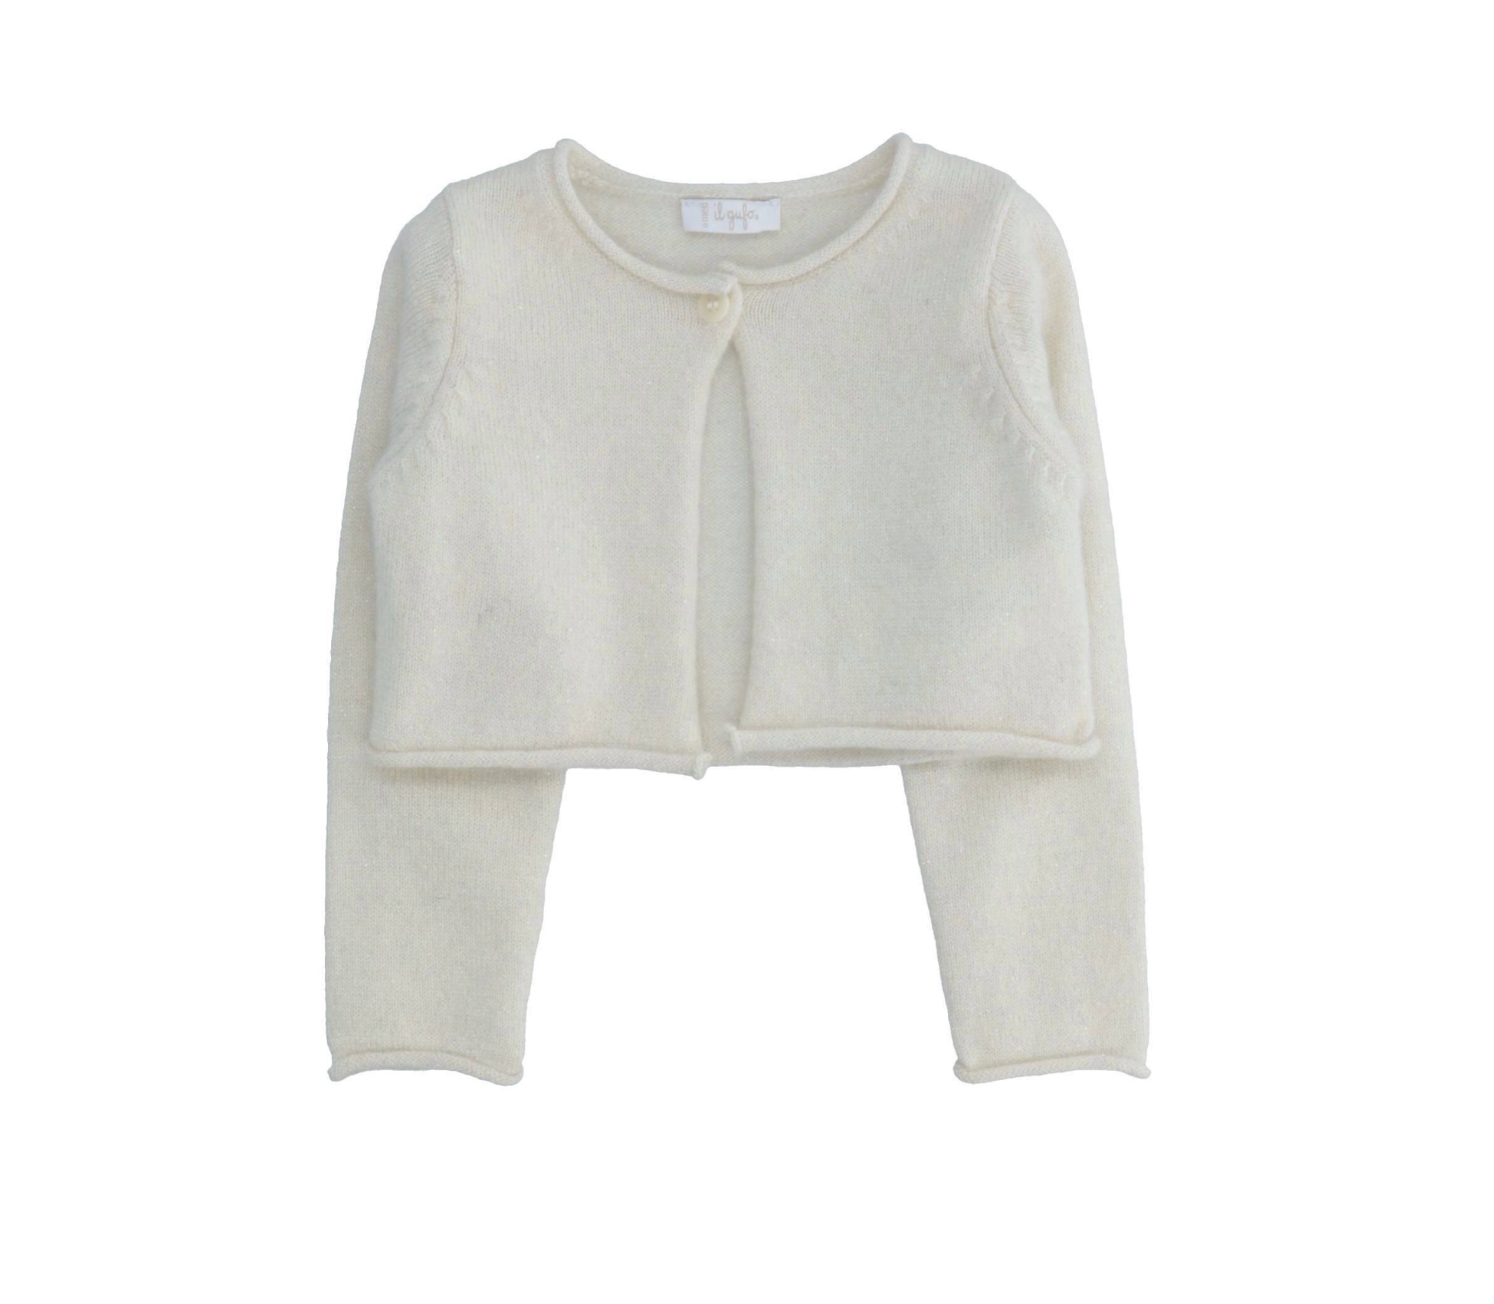 IL GUFO - Beige jumper with sequin effect wool fibers - 1 year old